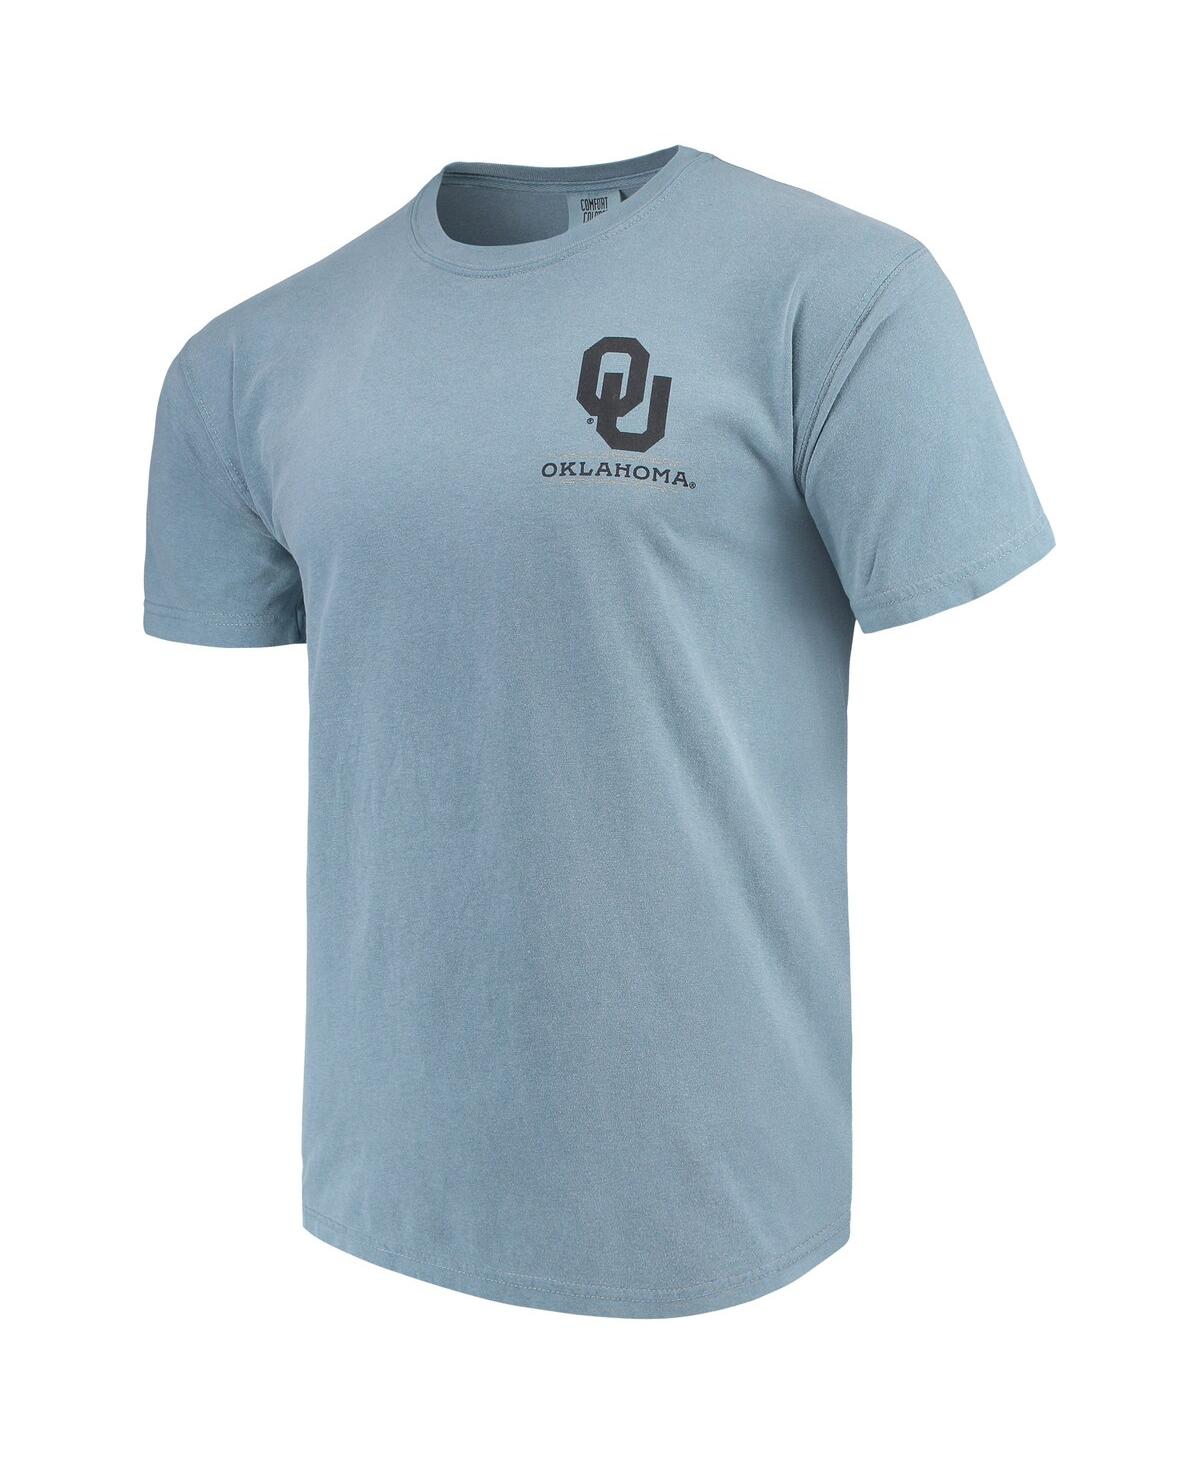 Shop Image One Men's Blue Oklahoma Sooners State Scenery Comfort Colors T-shirt